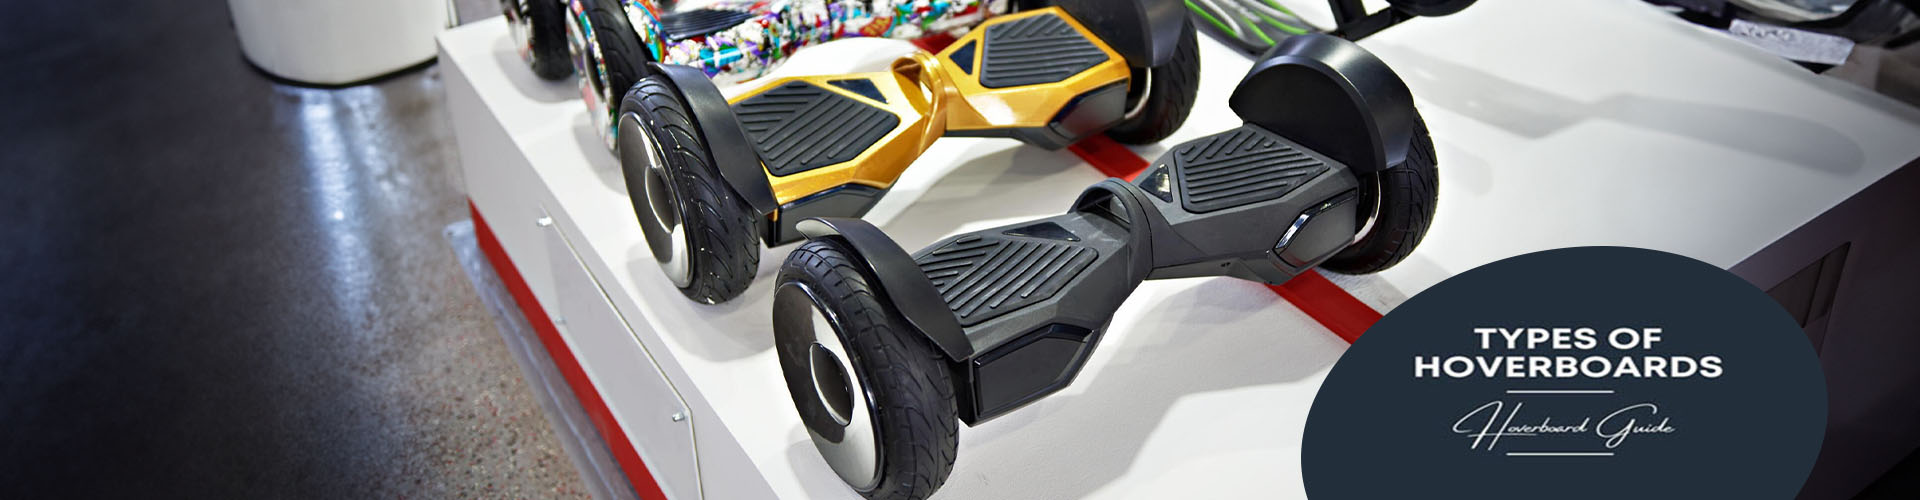 best Types Of Hoverboards